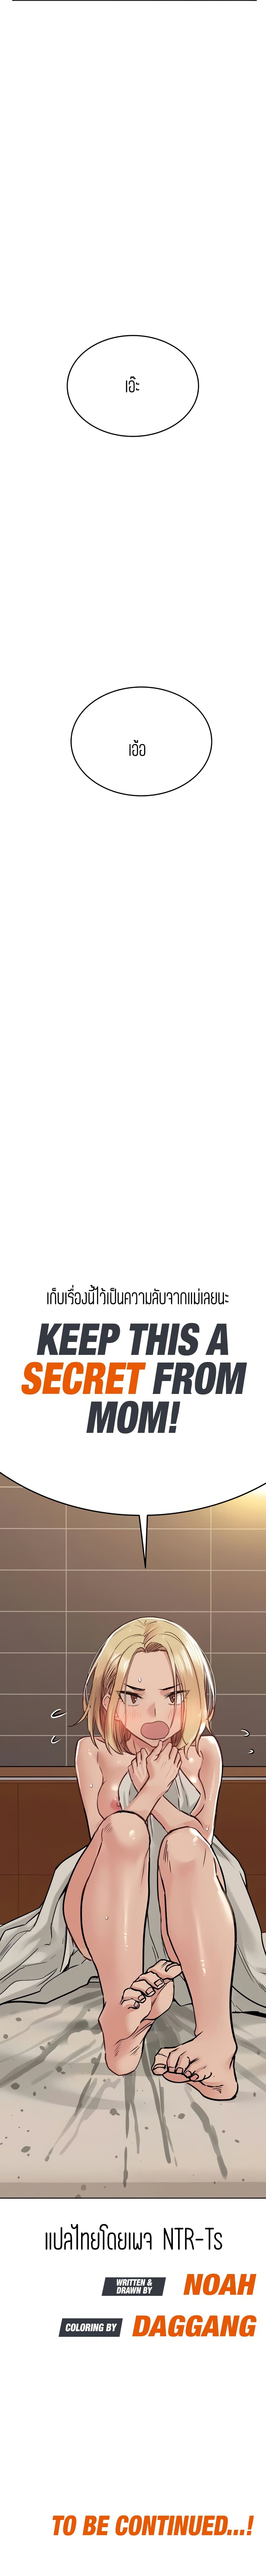 Keep it A Secret from Your Mother 24 20